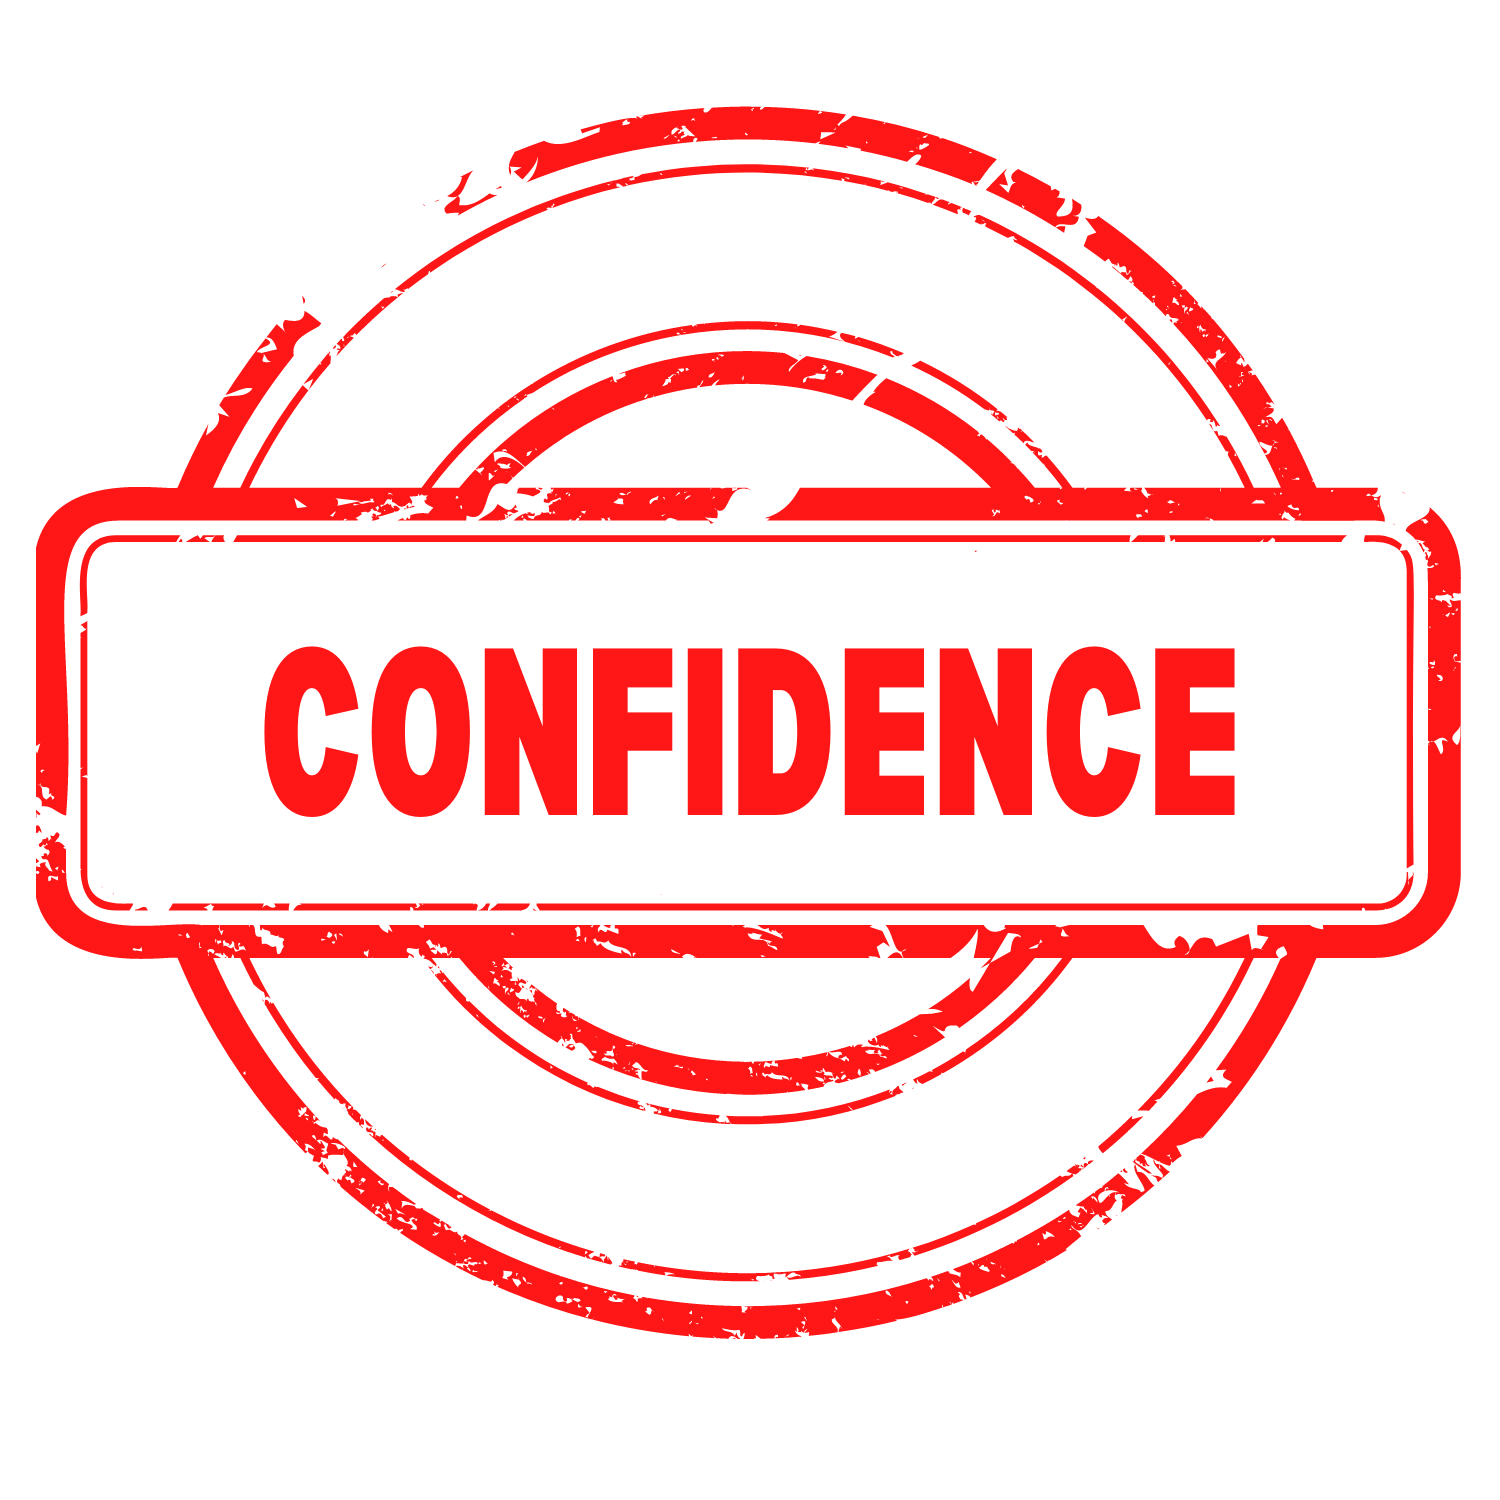 Big Mouth Theatre Confidence image